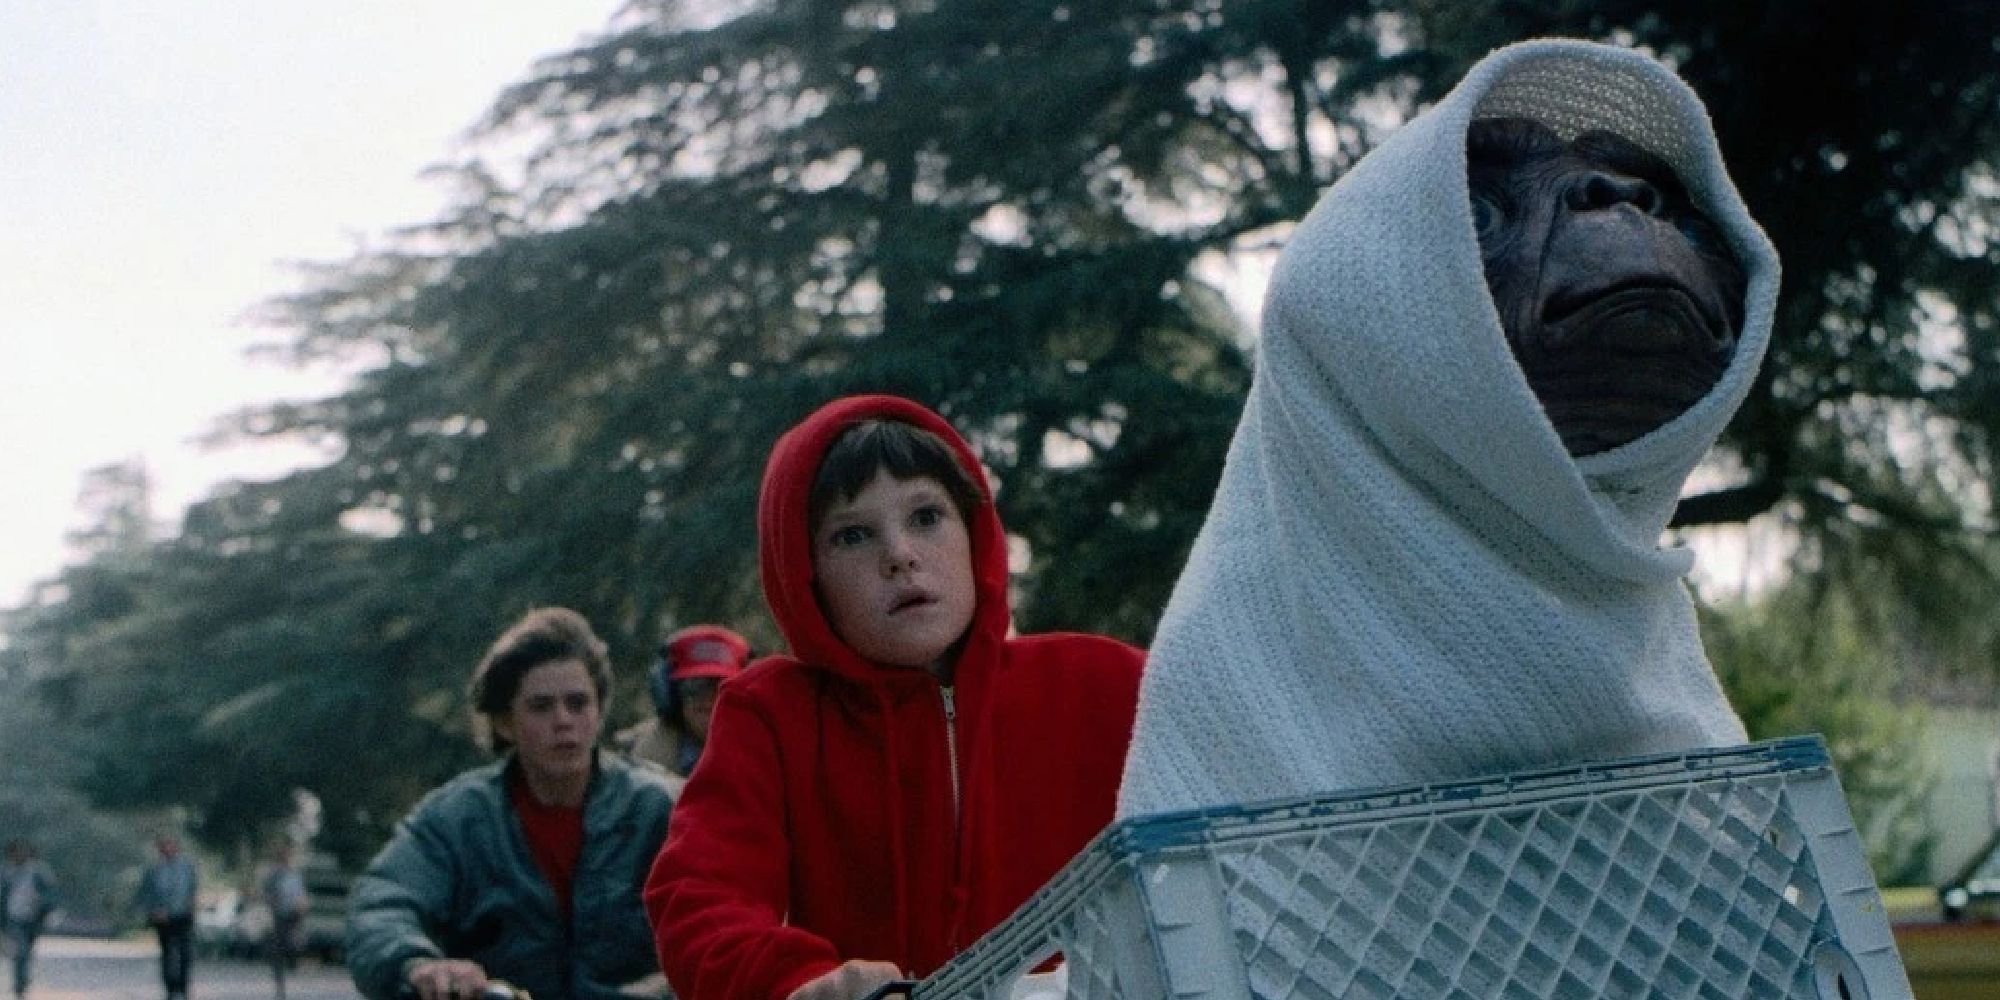 Elliott riding his bike with E.T. sitting in the basket